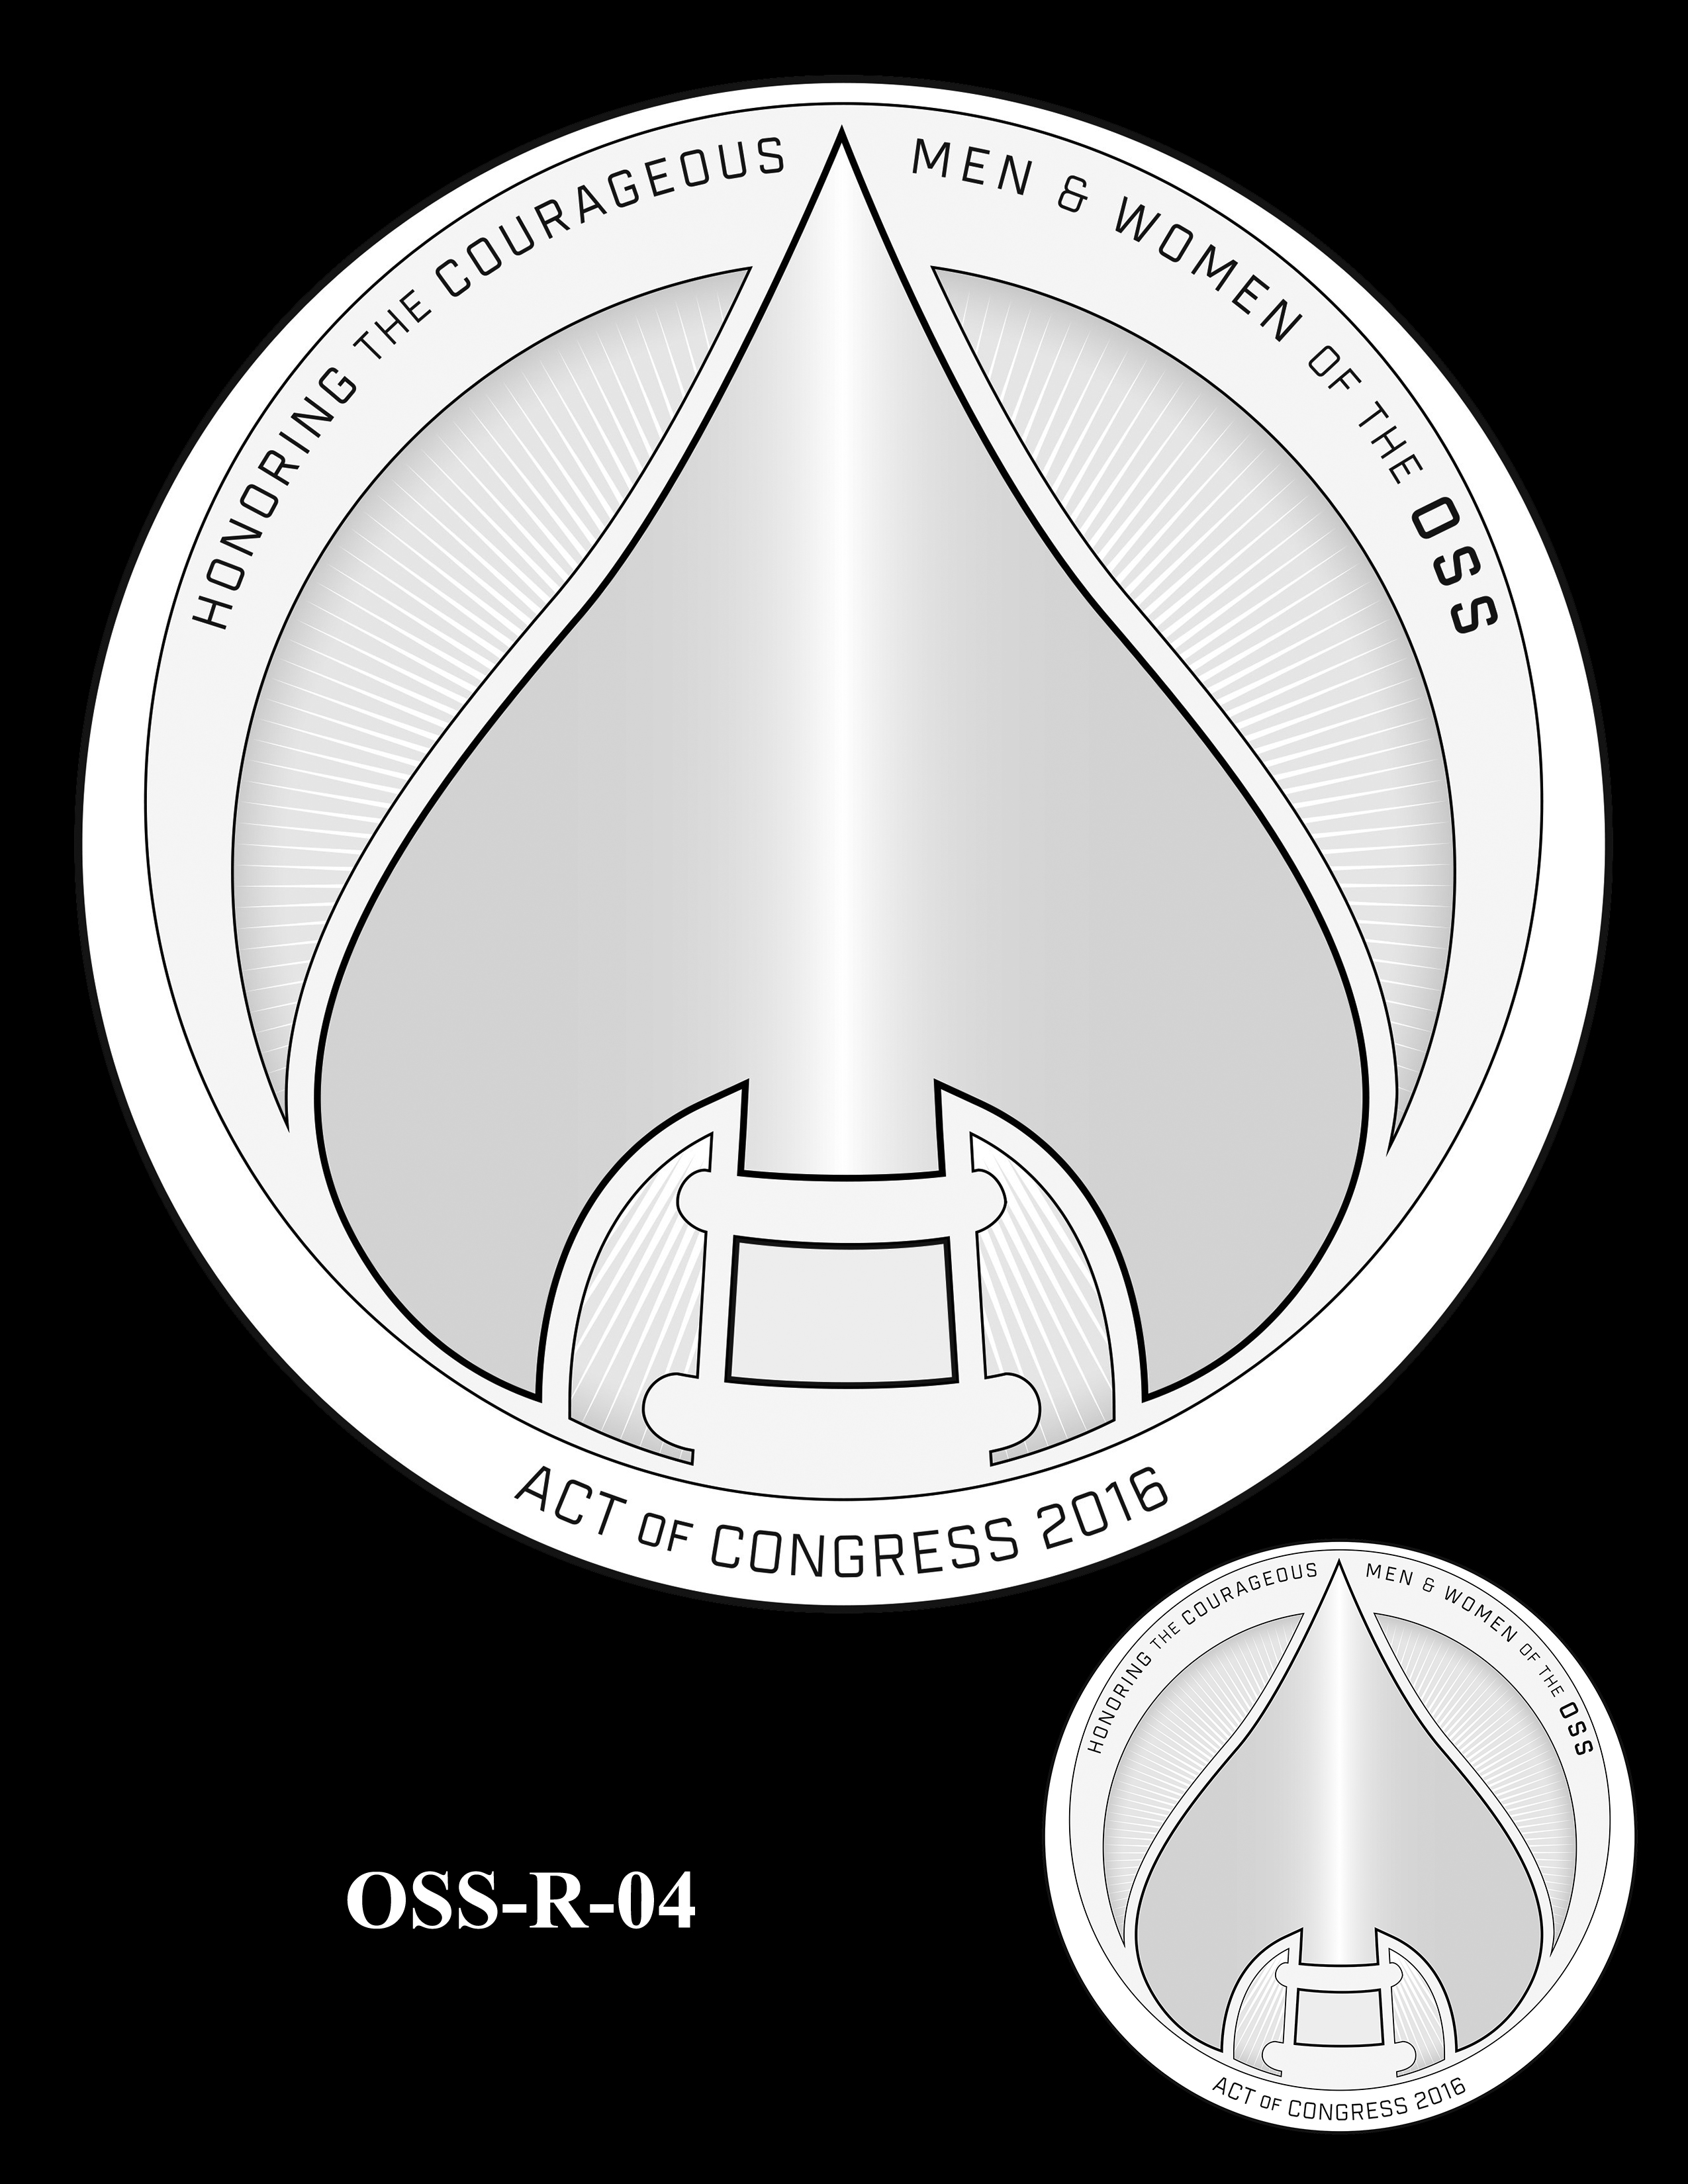 OSS-R-04 -- Office of Strategic Services Congressional Gold Medal